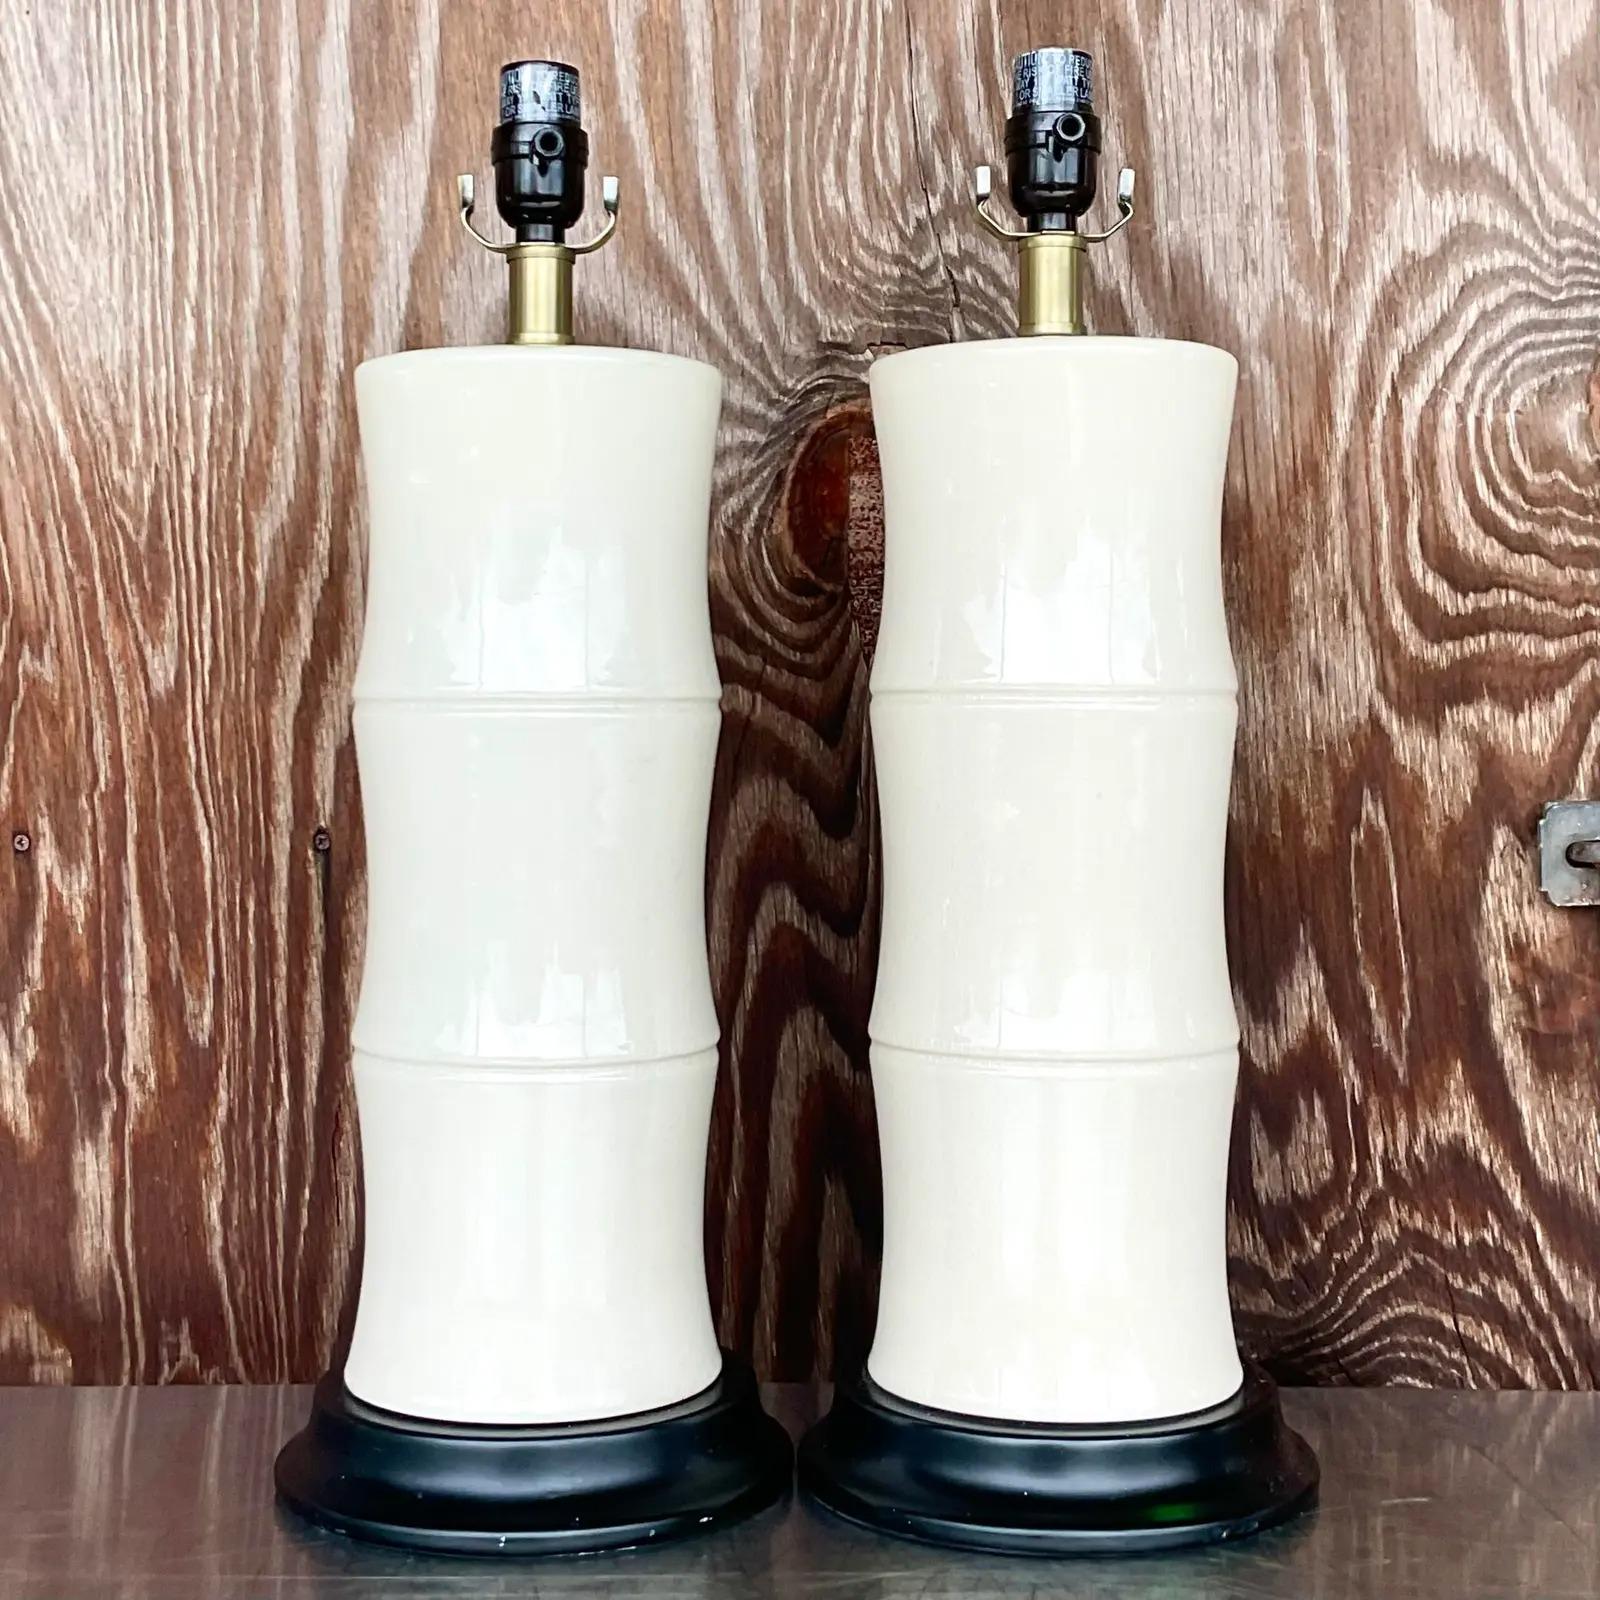 Fabulous pair of vintage Coastal table lamps. A beautiful ivory color in a glazed ceramic finish. Rest on embody plinths. Acquired from a palm Beach estate.